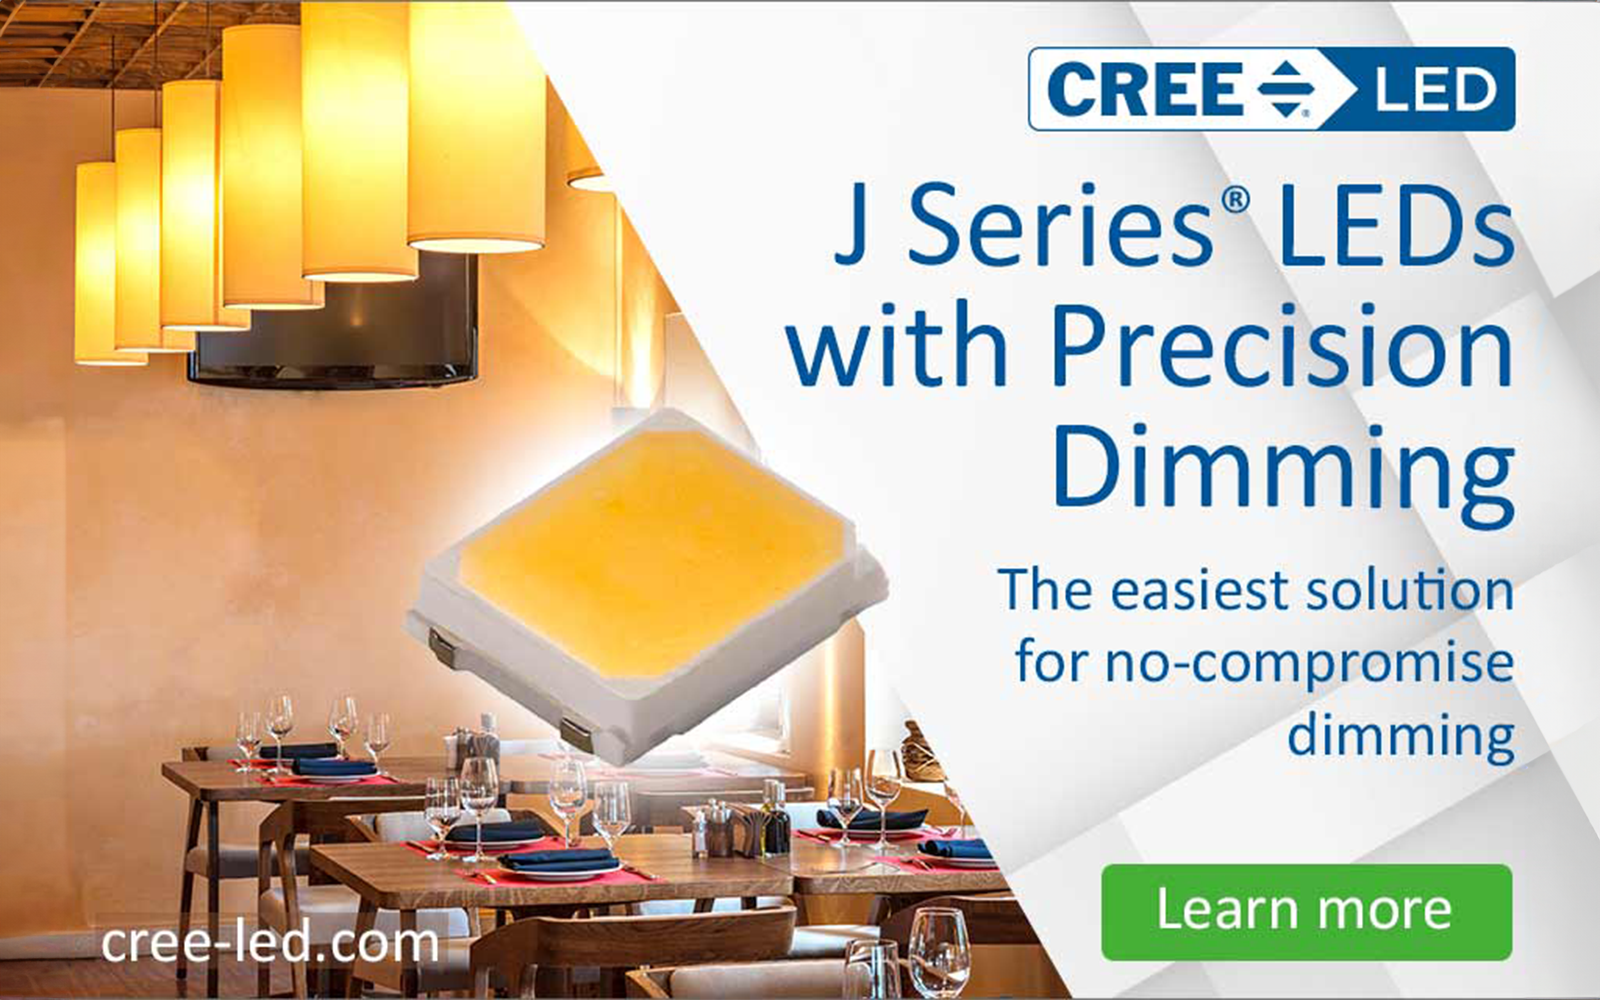 Cree LED Precision Dimming: Better Control, Simple Binning — LED